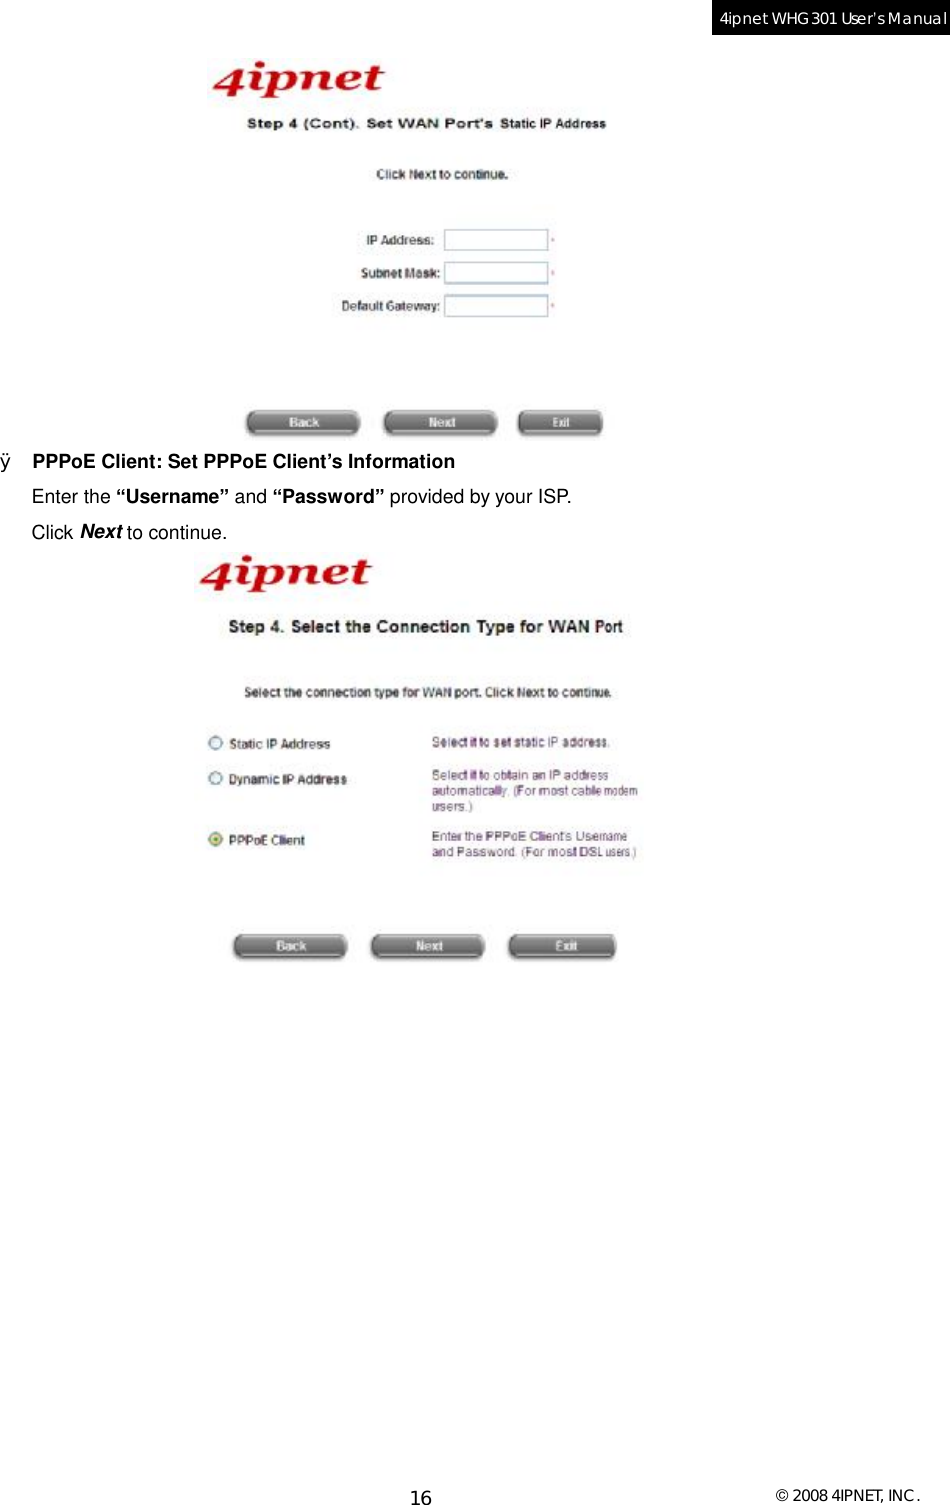  © 2008 4IPNET, INC. 16 4ipnet WHG301 User’s Manual   Ø PPPoE Client: Set PPPoE Client’s Information Enter the “Username” and “Password” provided by your ISP. Click Next to continue.   